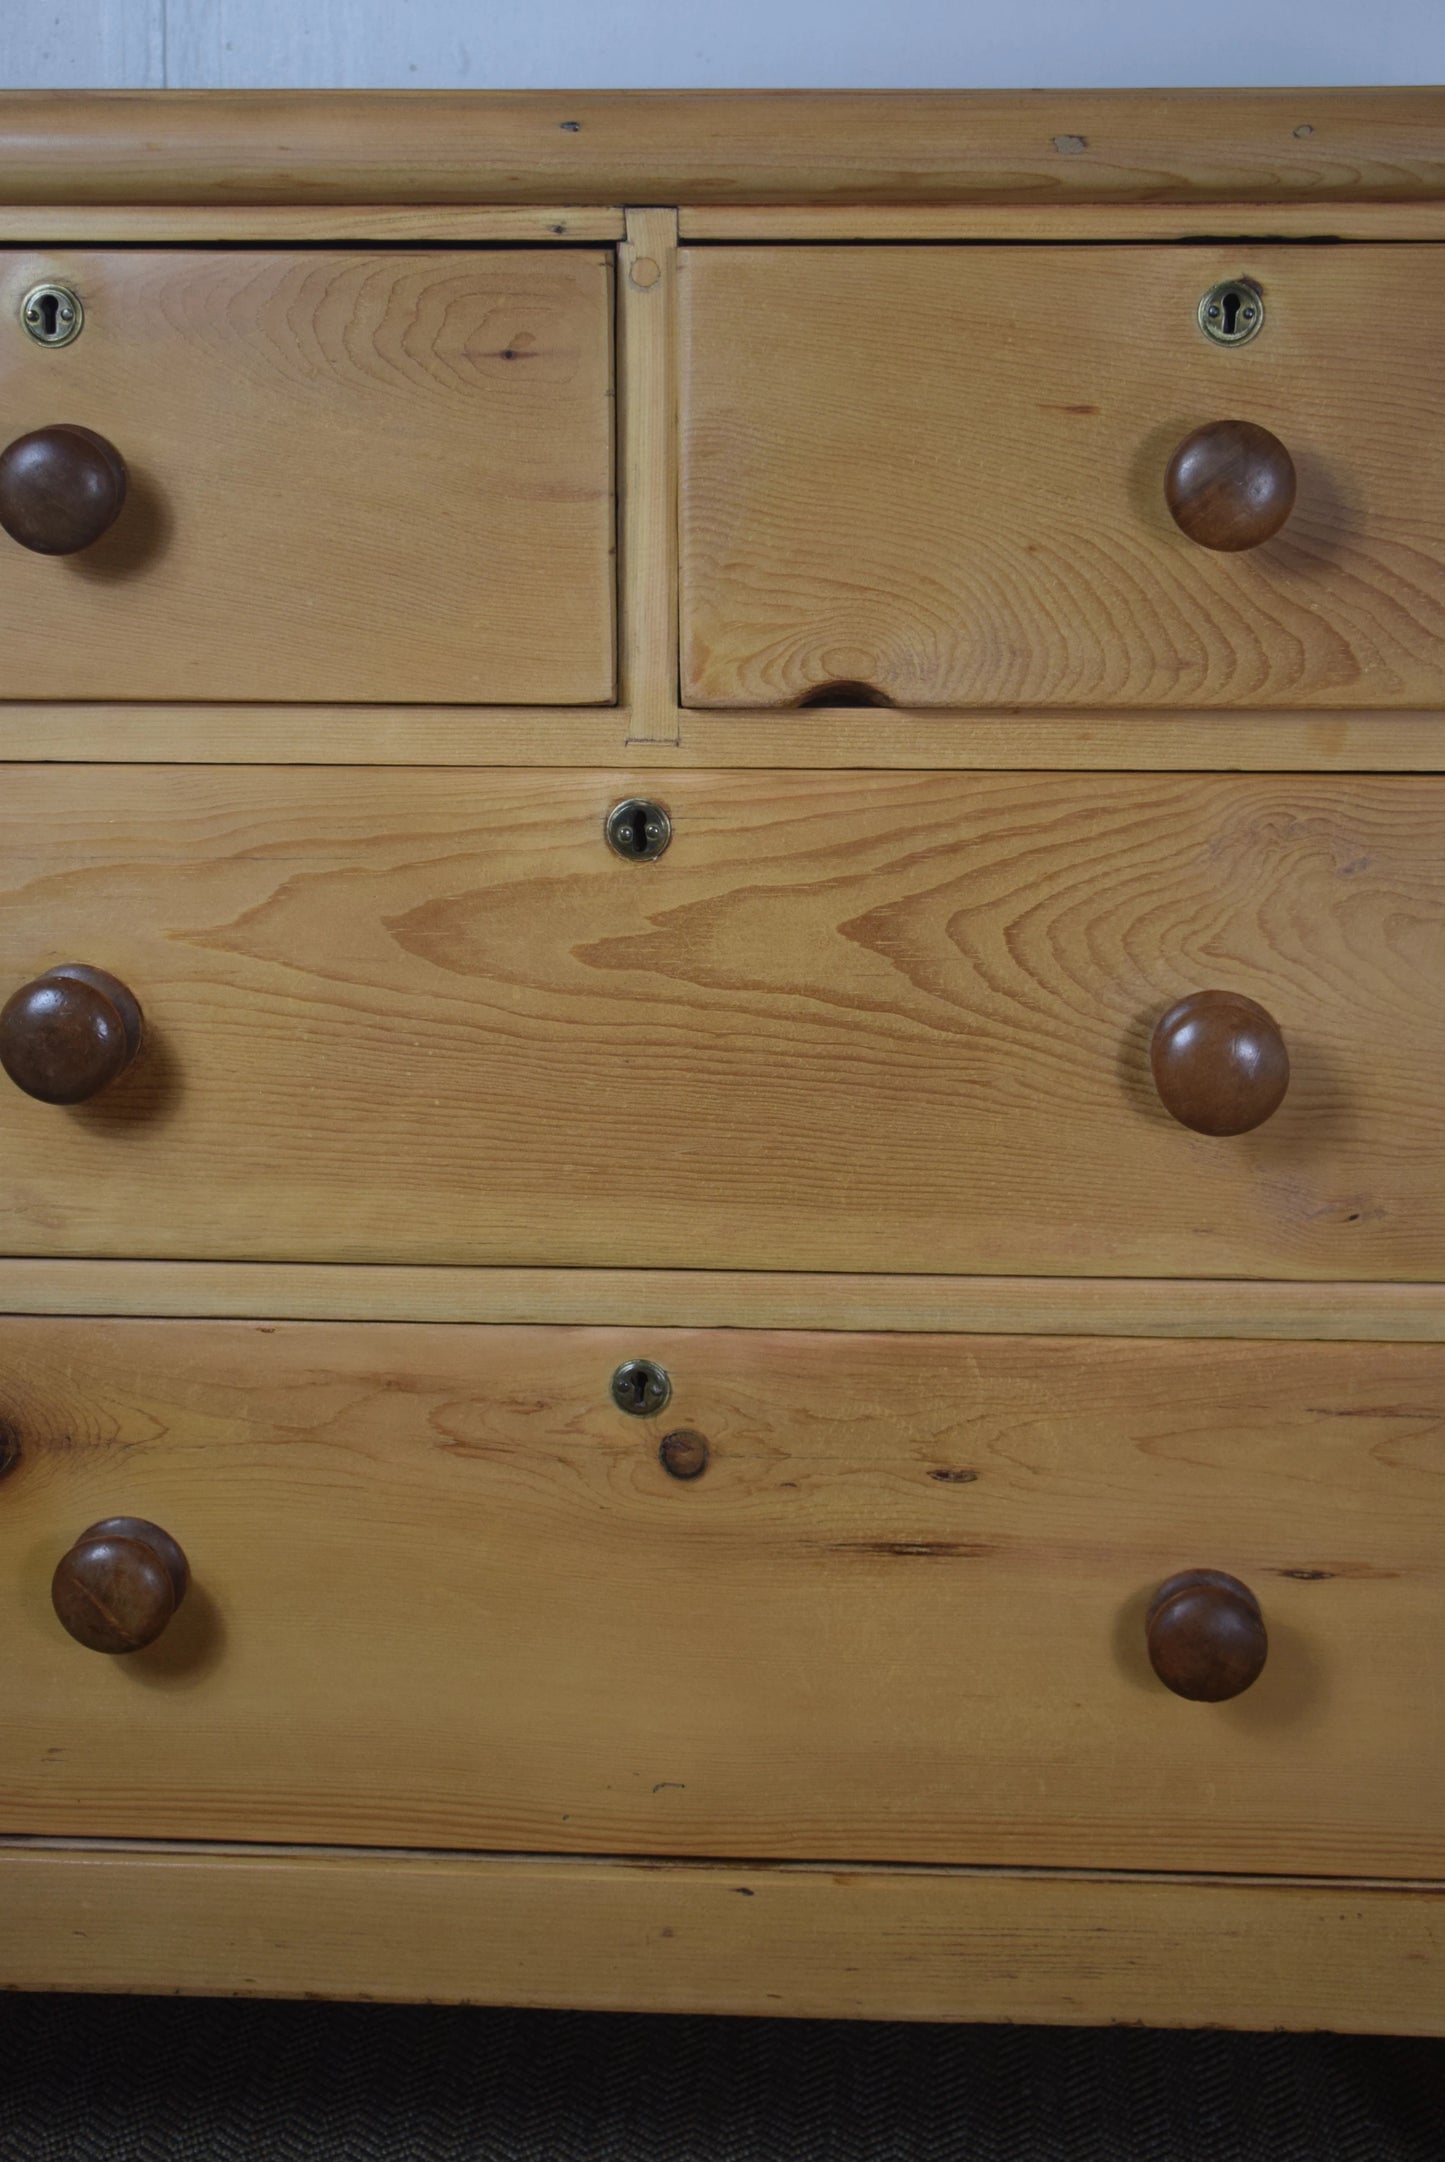 Exquisite 19th Century Pine Farmhouse Chest of Drawers